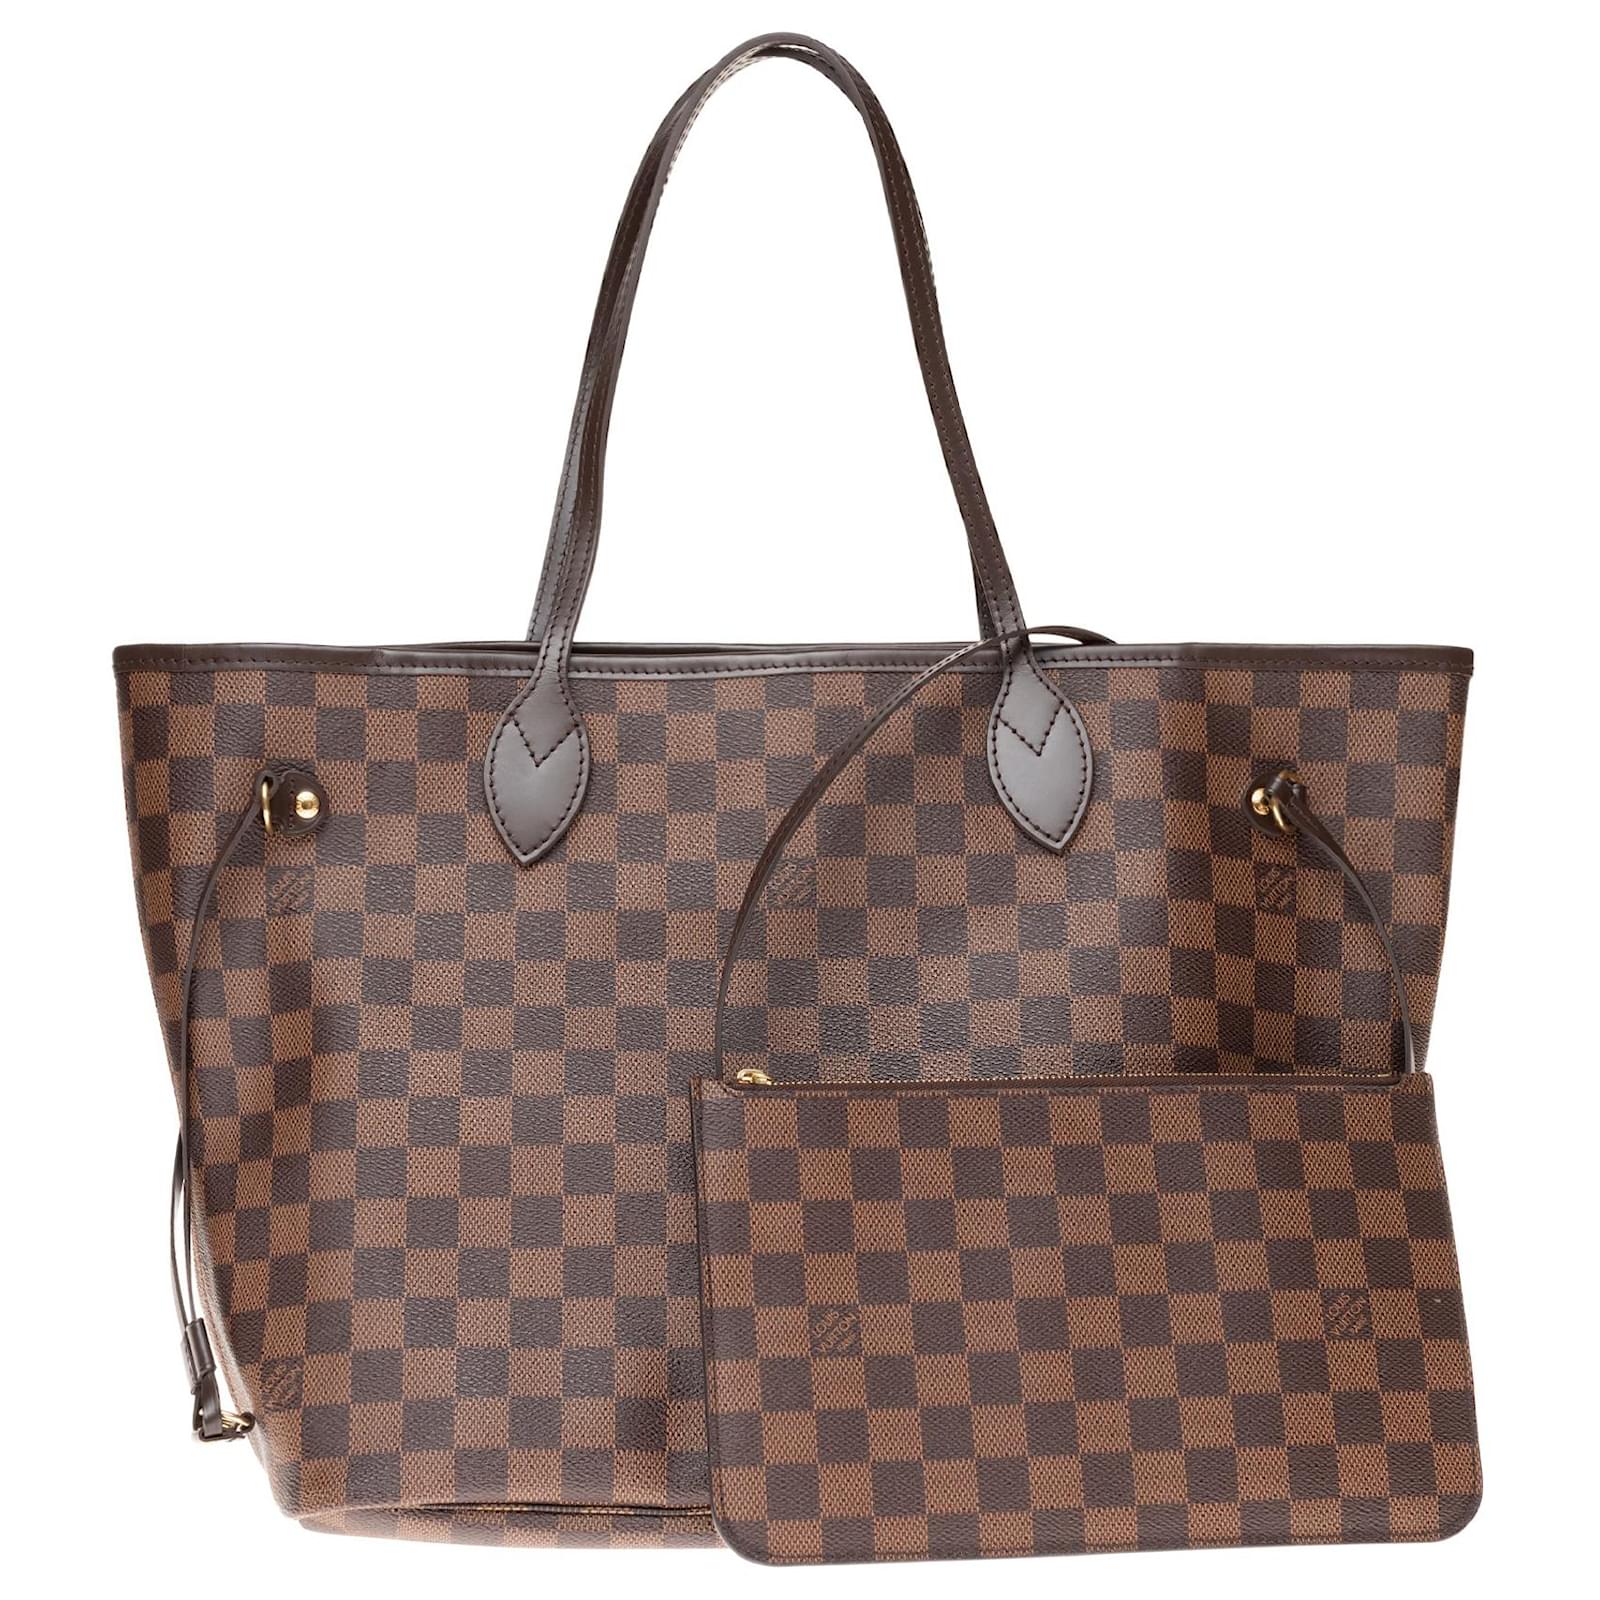 Louis Vuitton Neverfull MM tote in ebony checkerboard with clutch